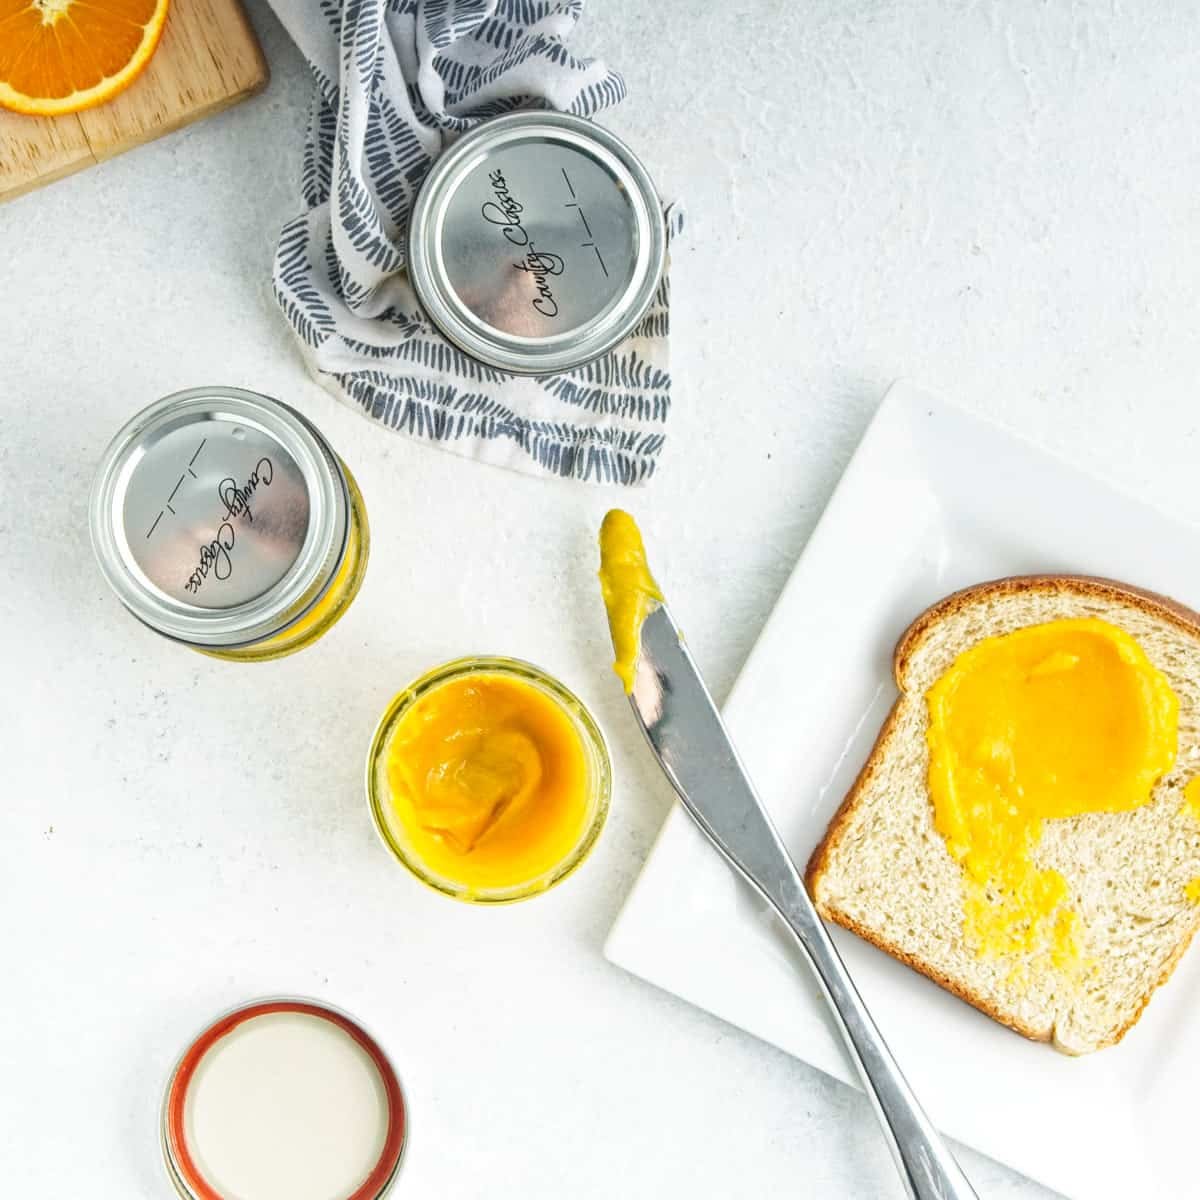 Small mason jars of orange curd next to a plate with slice of bread spread with the orange curd.